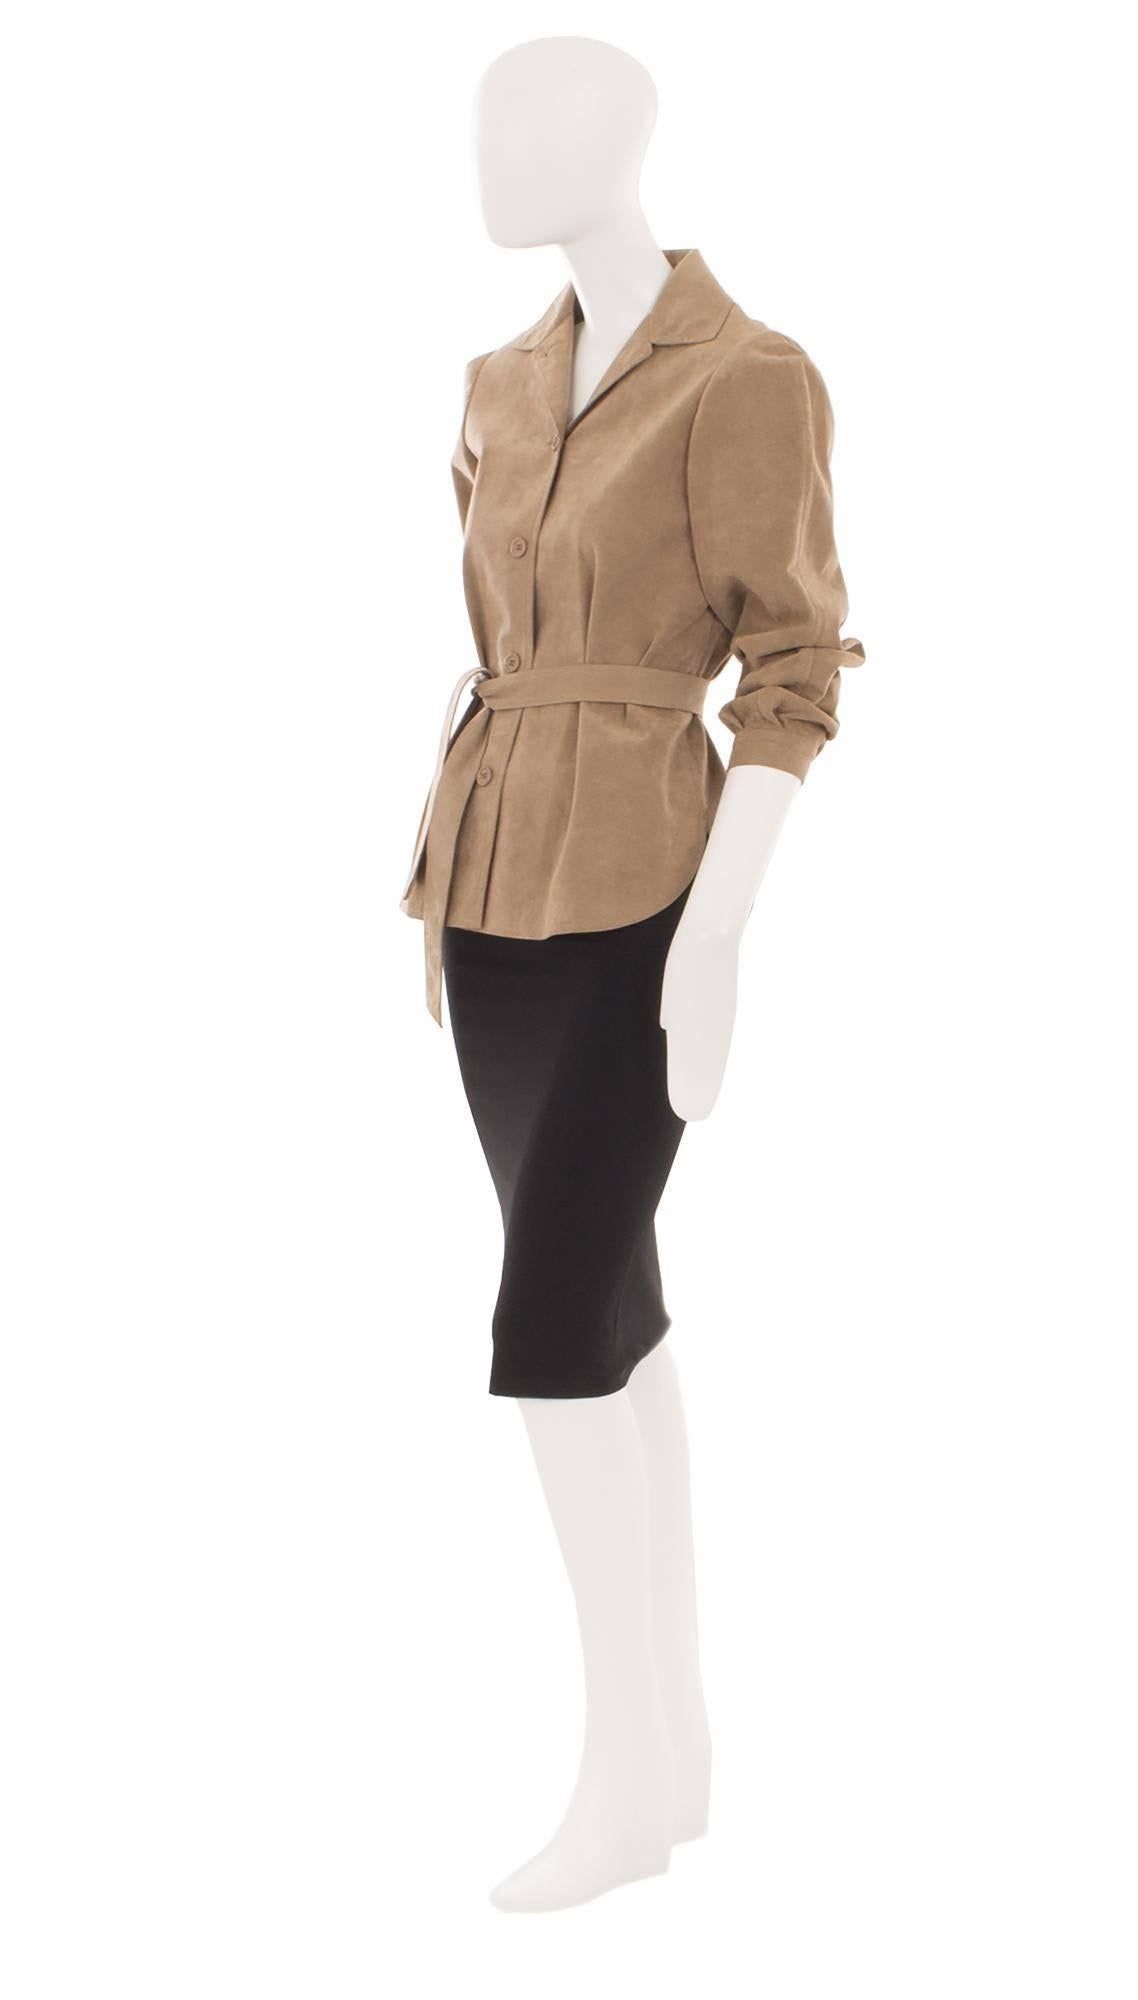 Constructed in tan Ultrasuede, this beautifully cut Halston jacket will be sure to hit the right note in the Boardroom. The longer length, tied at the waist with the original fabric matched belt, elongates the body while the wide sleeves add volume